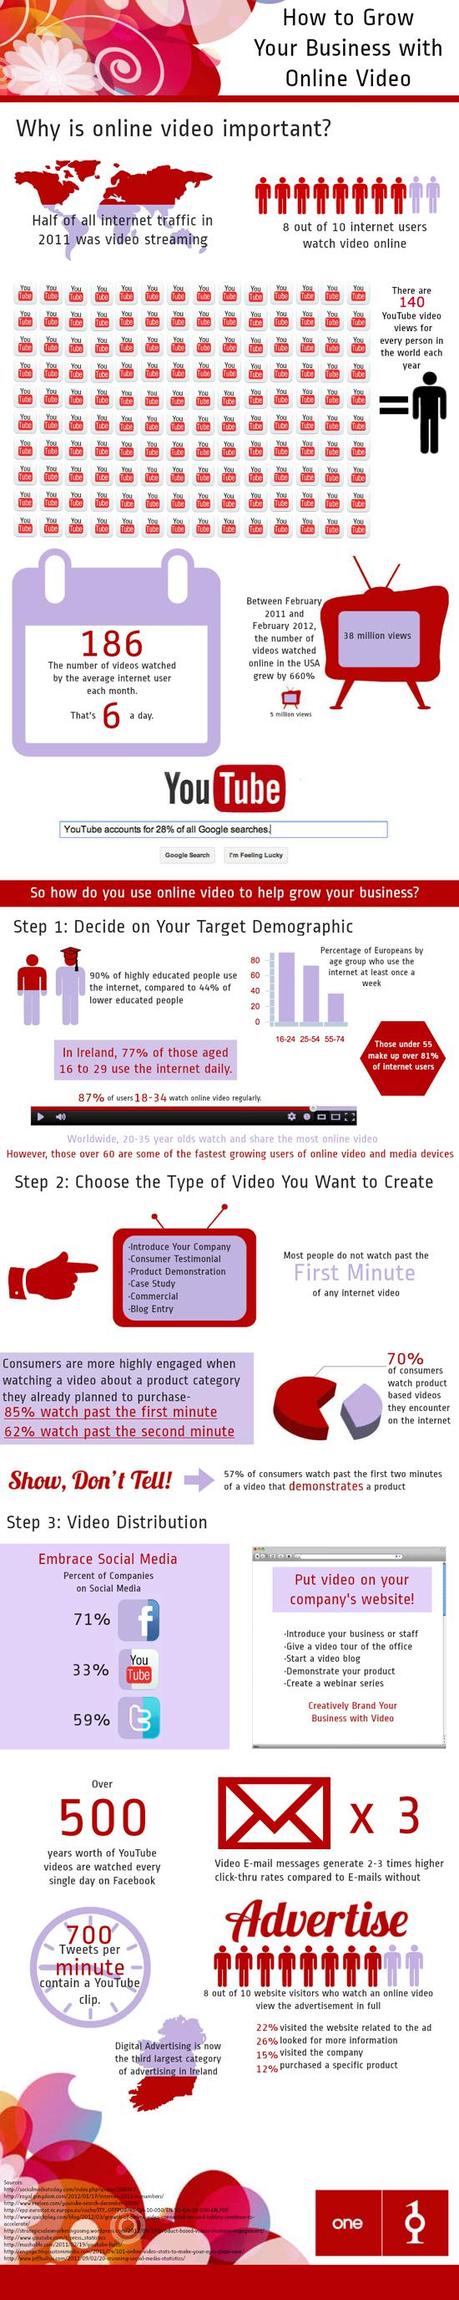 Infographic on Online Video